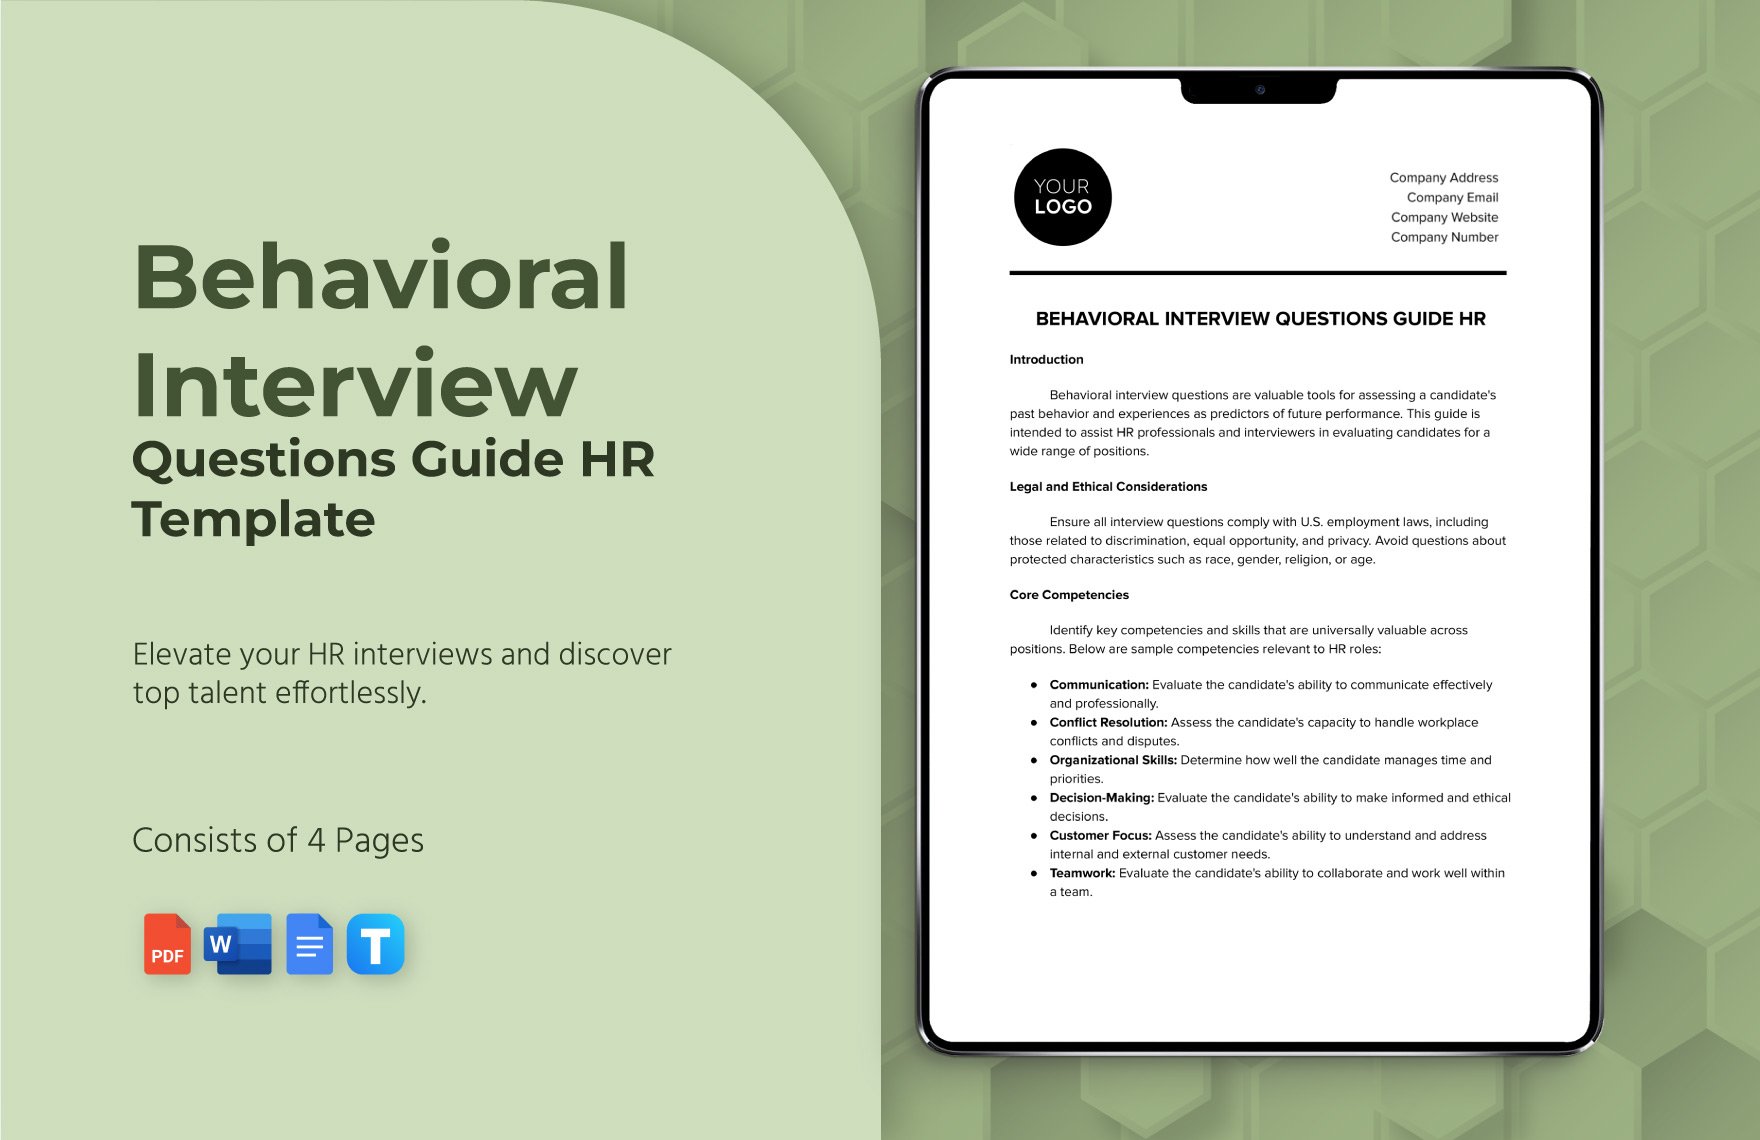 Behavioral Interview Questions Guide HR Template in Word, Google Docs, PDF